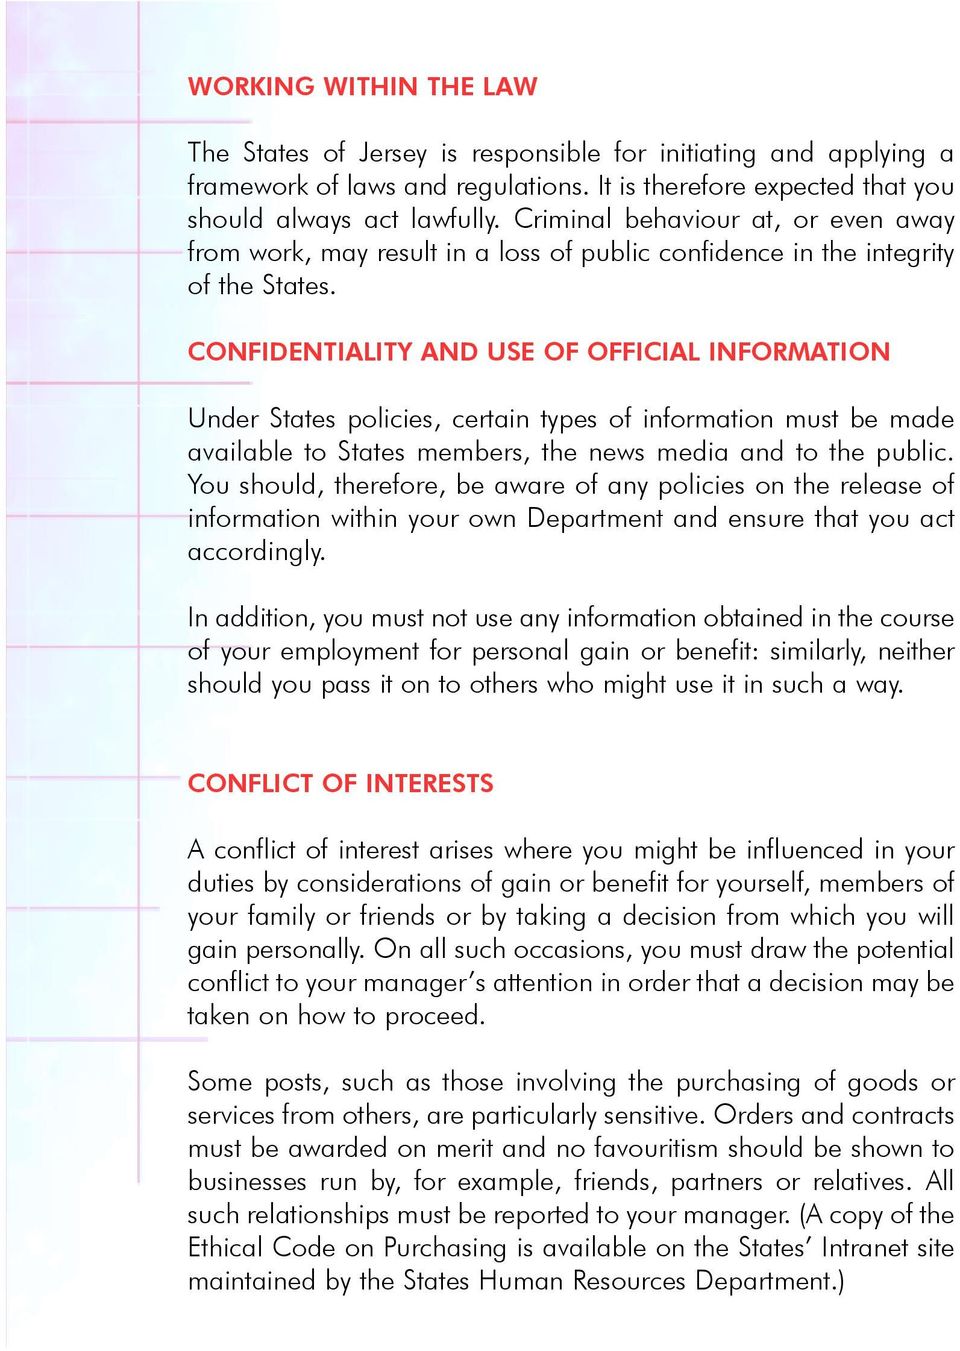 CONFIDENTIALITY AND USE OF OFFICIAL INFORMATION Under States policies, certain types of information must be made available to States members, the news media and to the public.